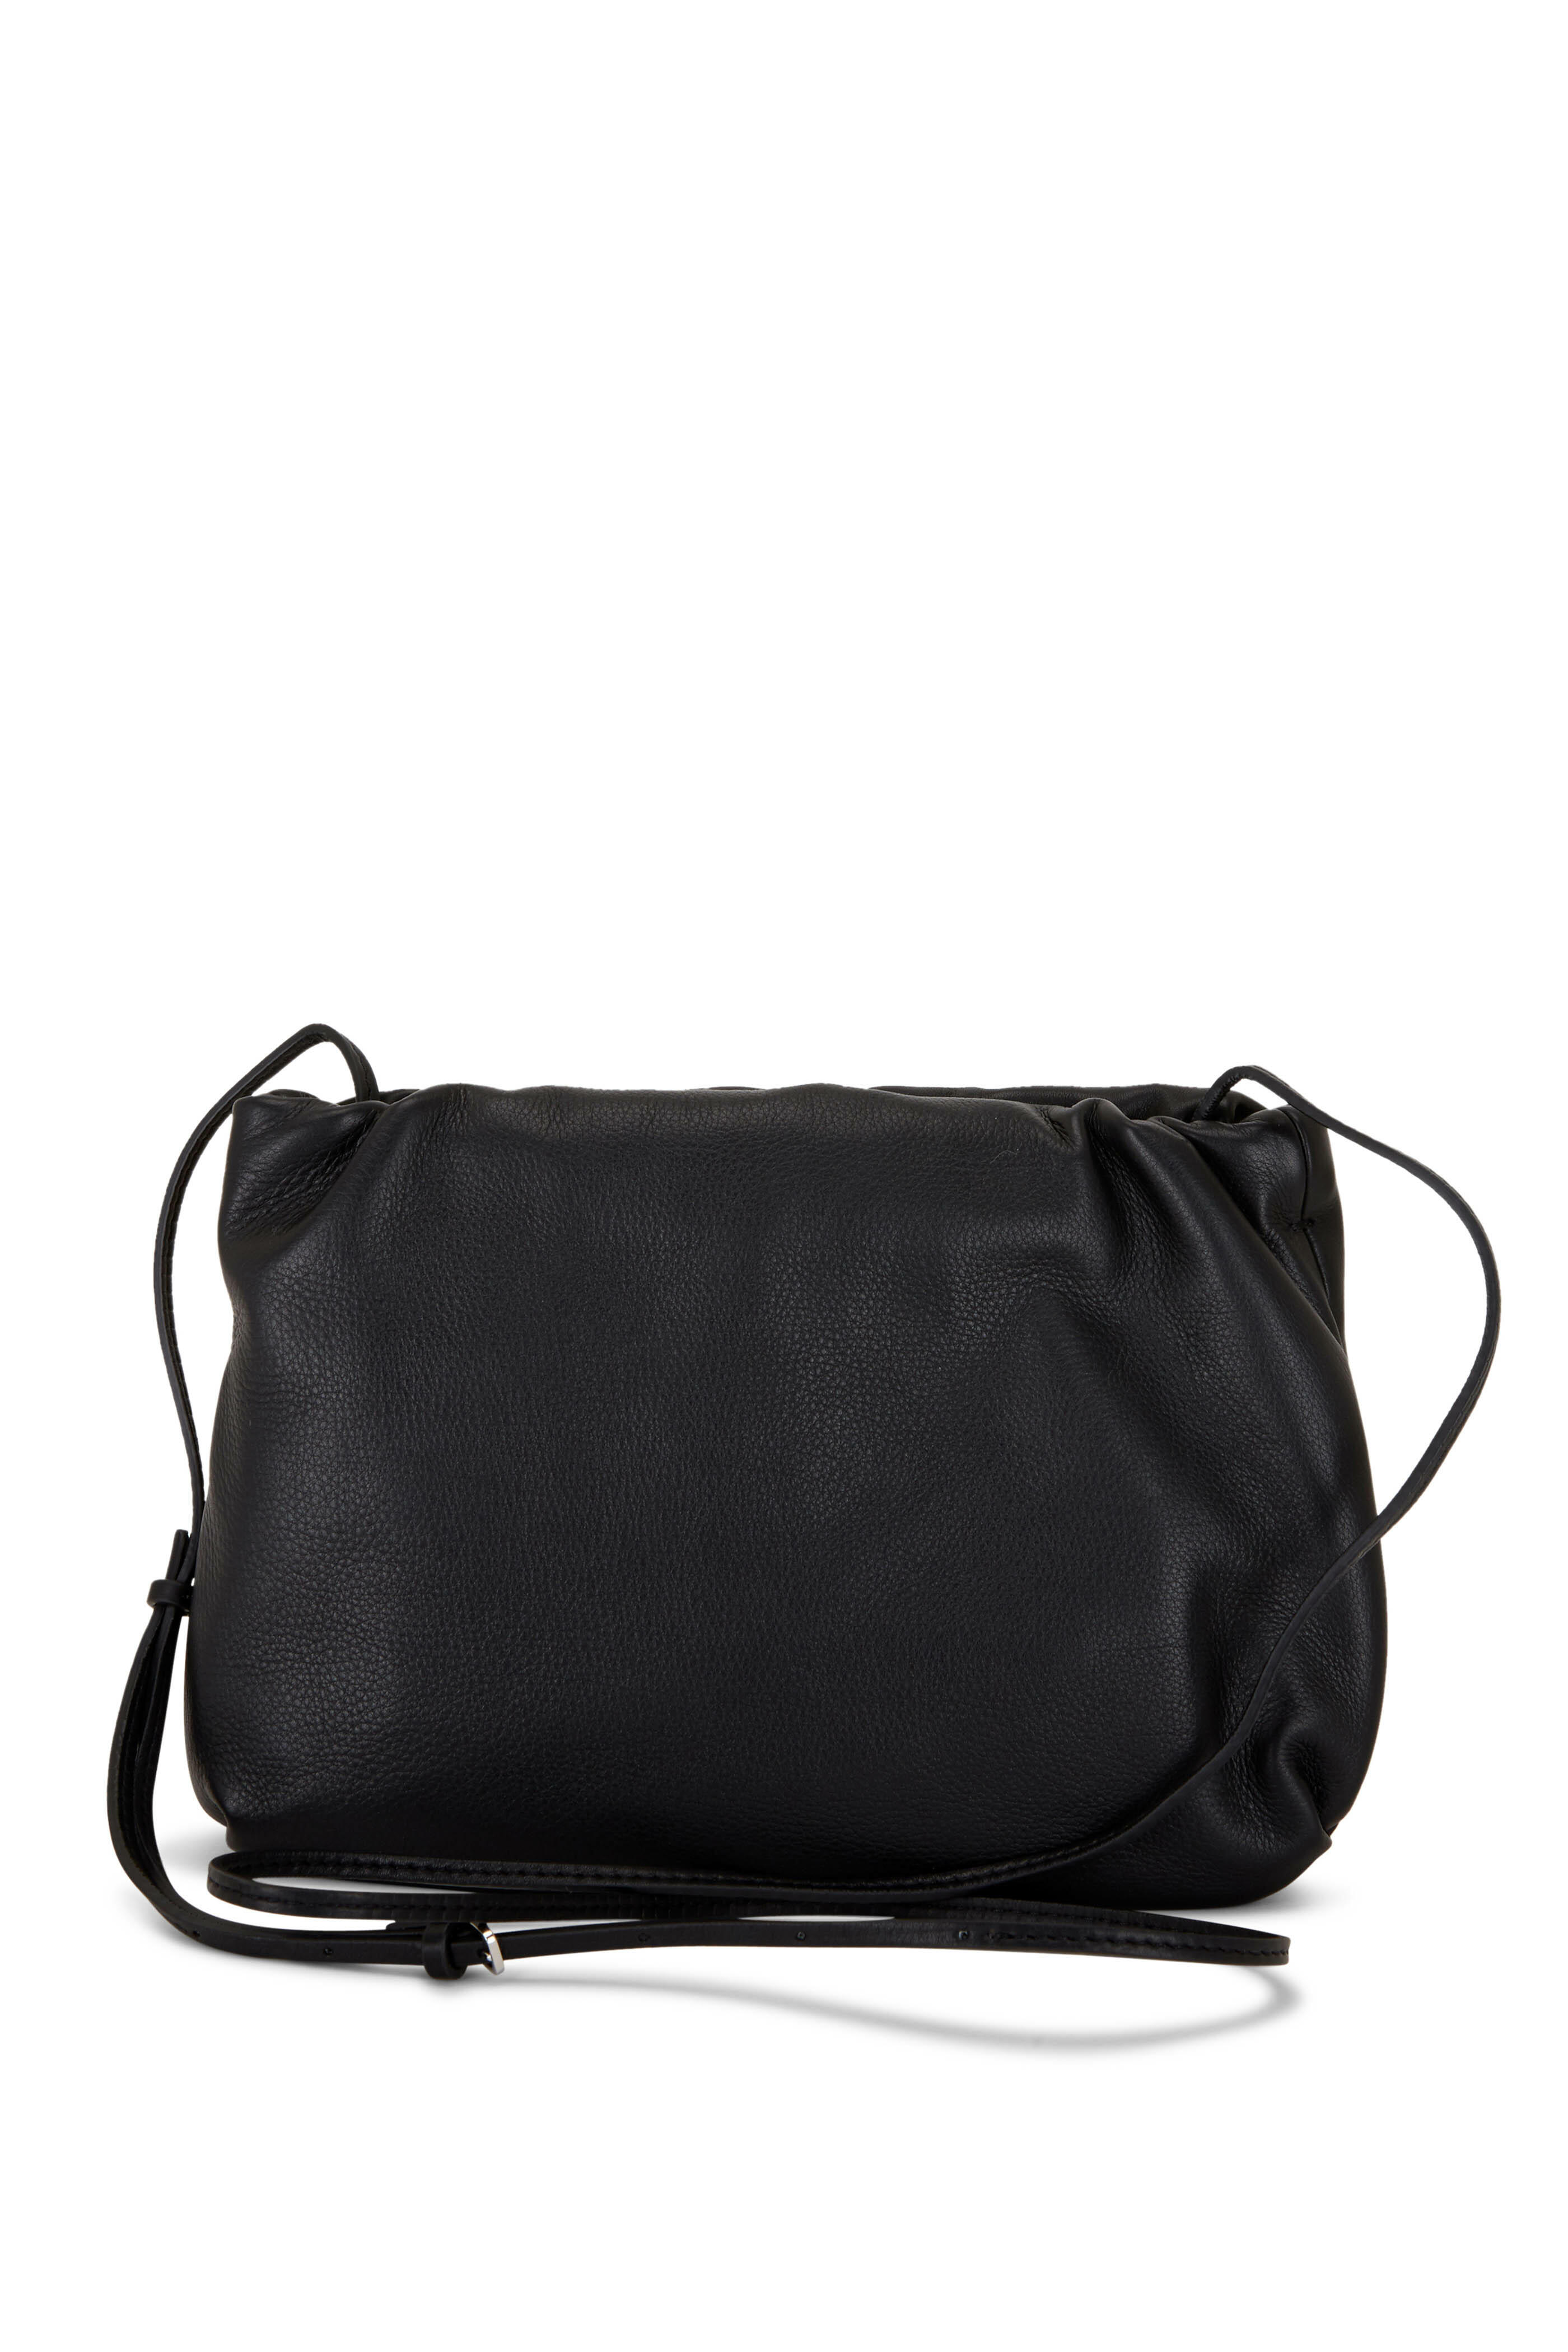 The Row - Bourse Black Leather Clutch | Mitchell Stores